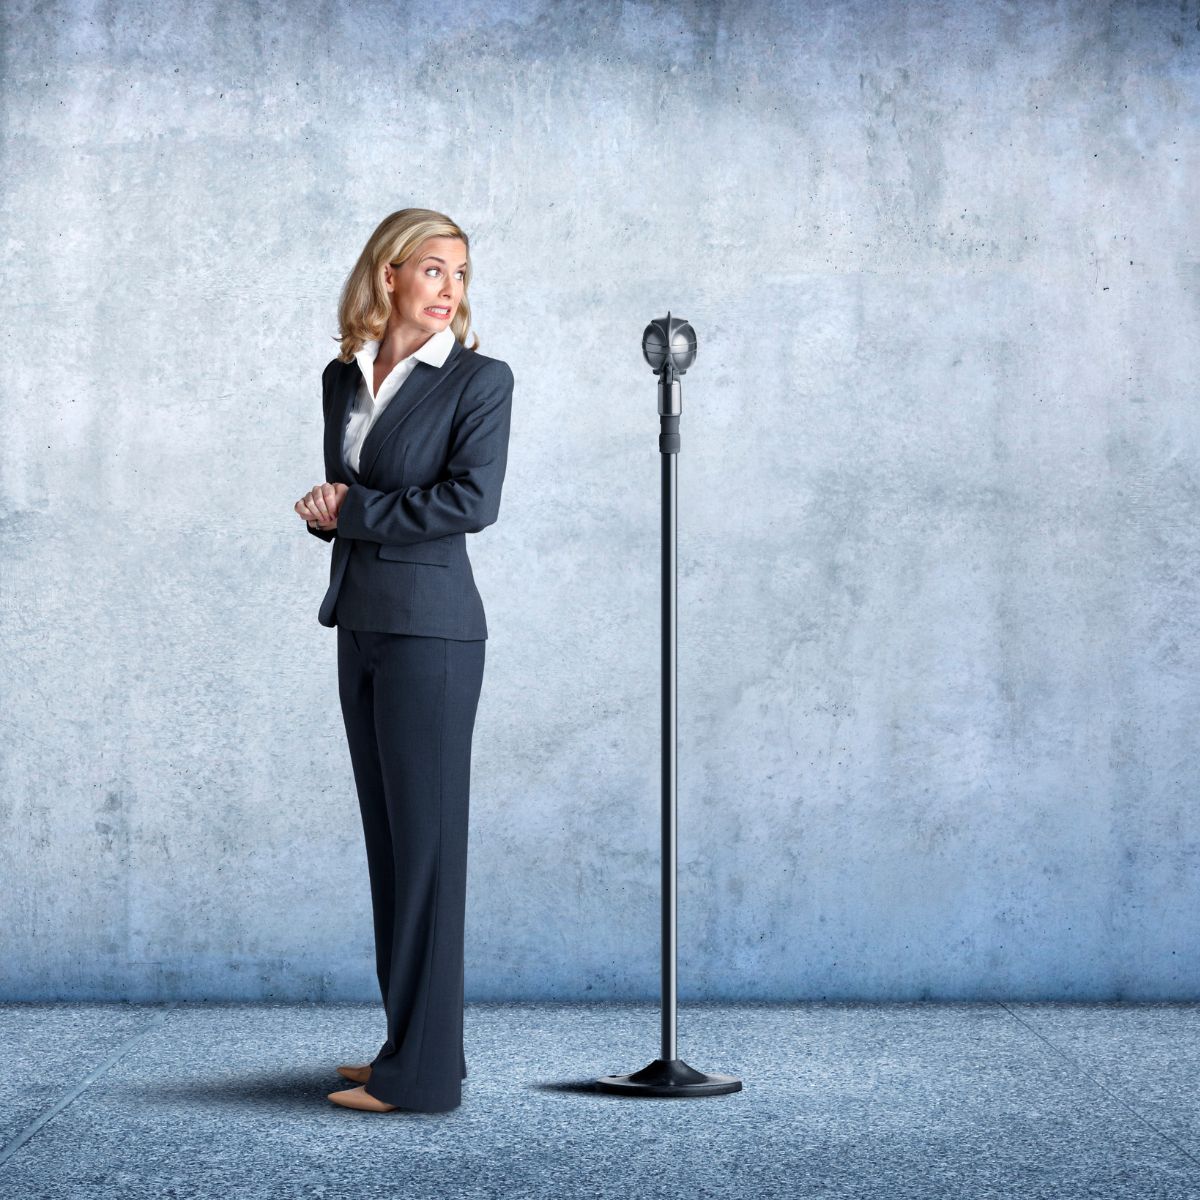 When to speak up and stand out